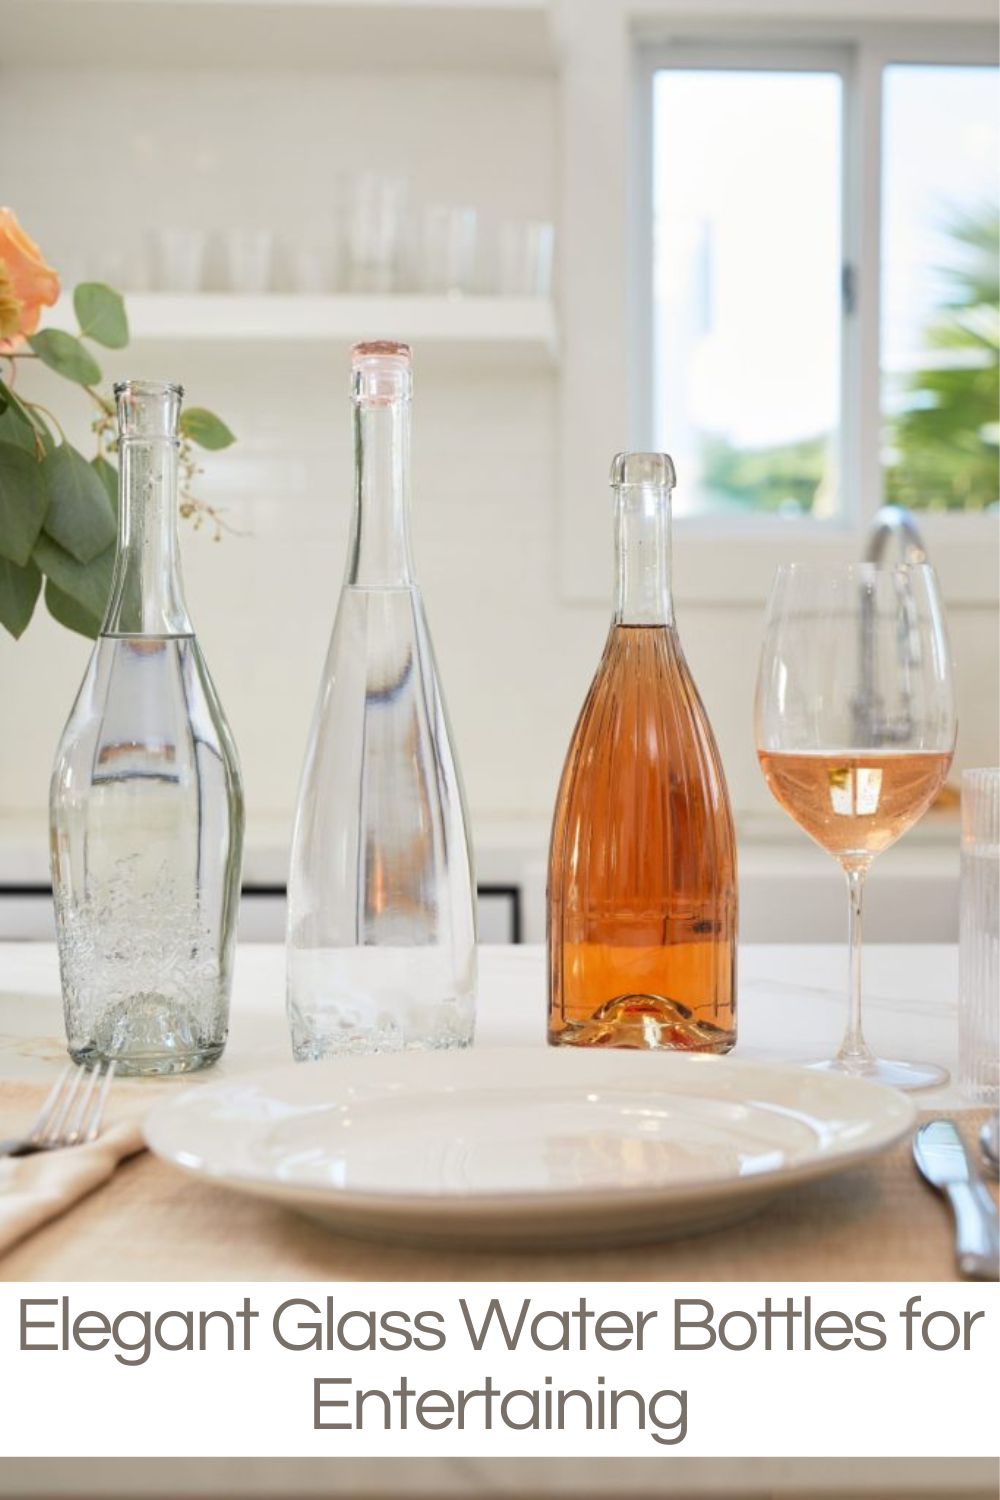 From the luxurious tablecloth to the gleaming silver, every element plays a part in creating that perfect table. What about elegant glass water bottles?